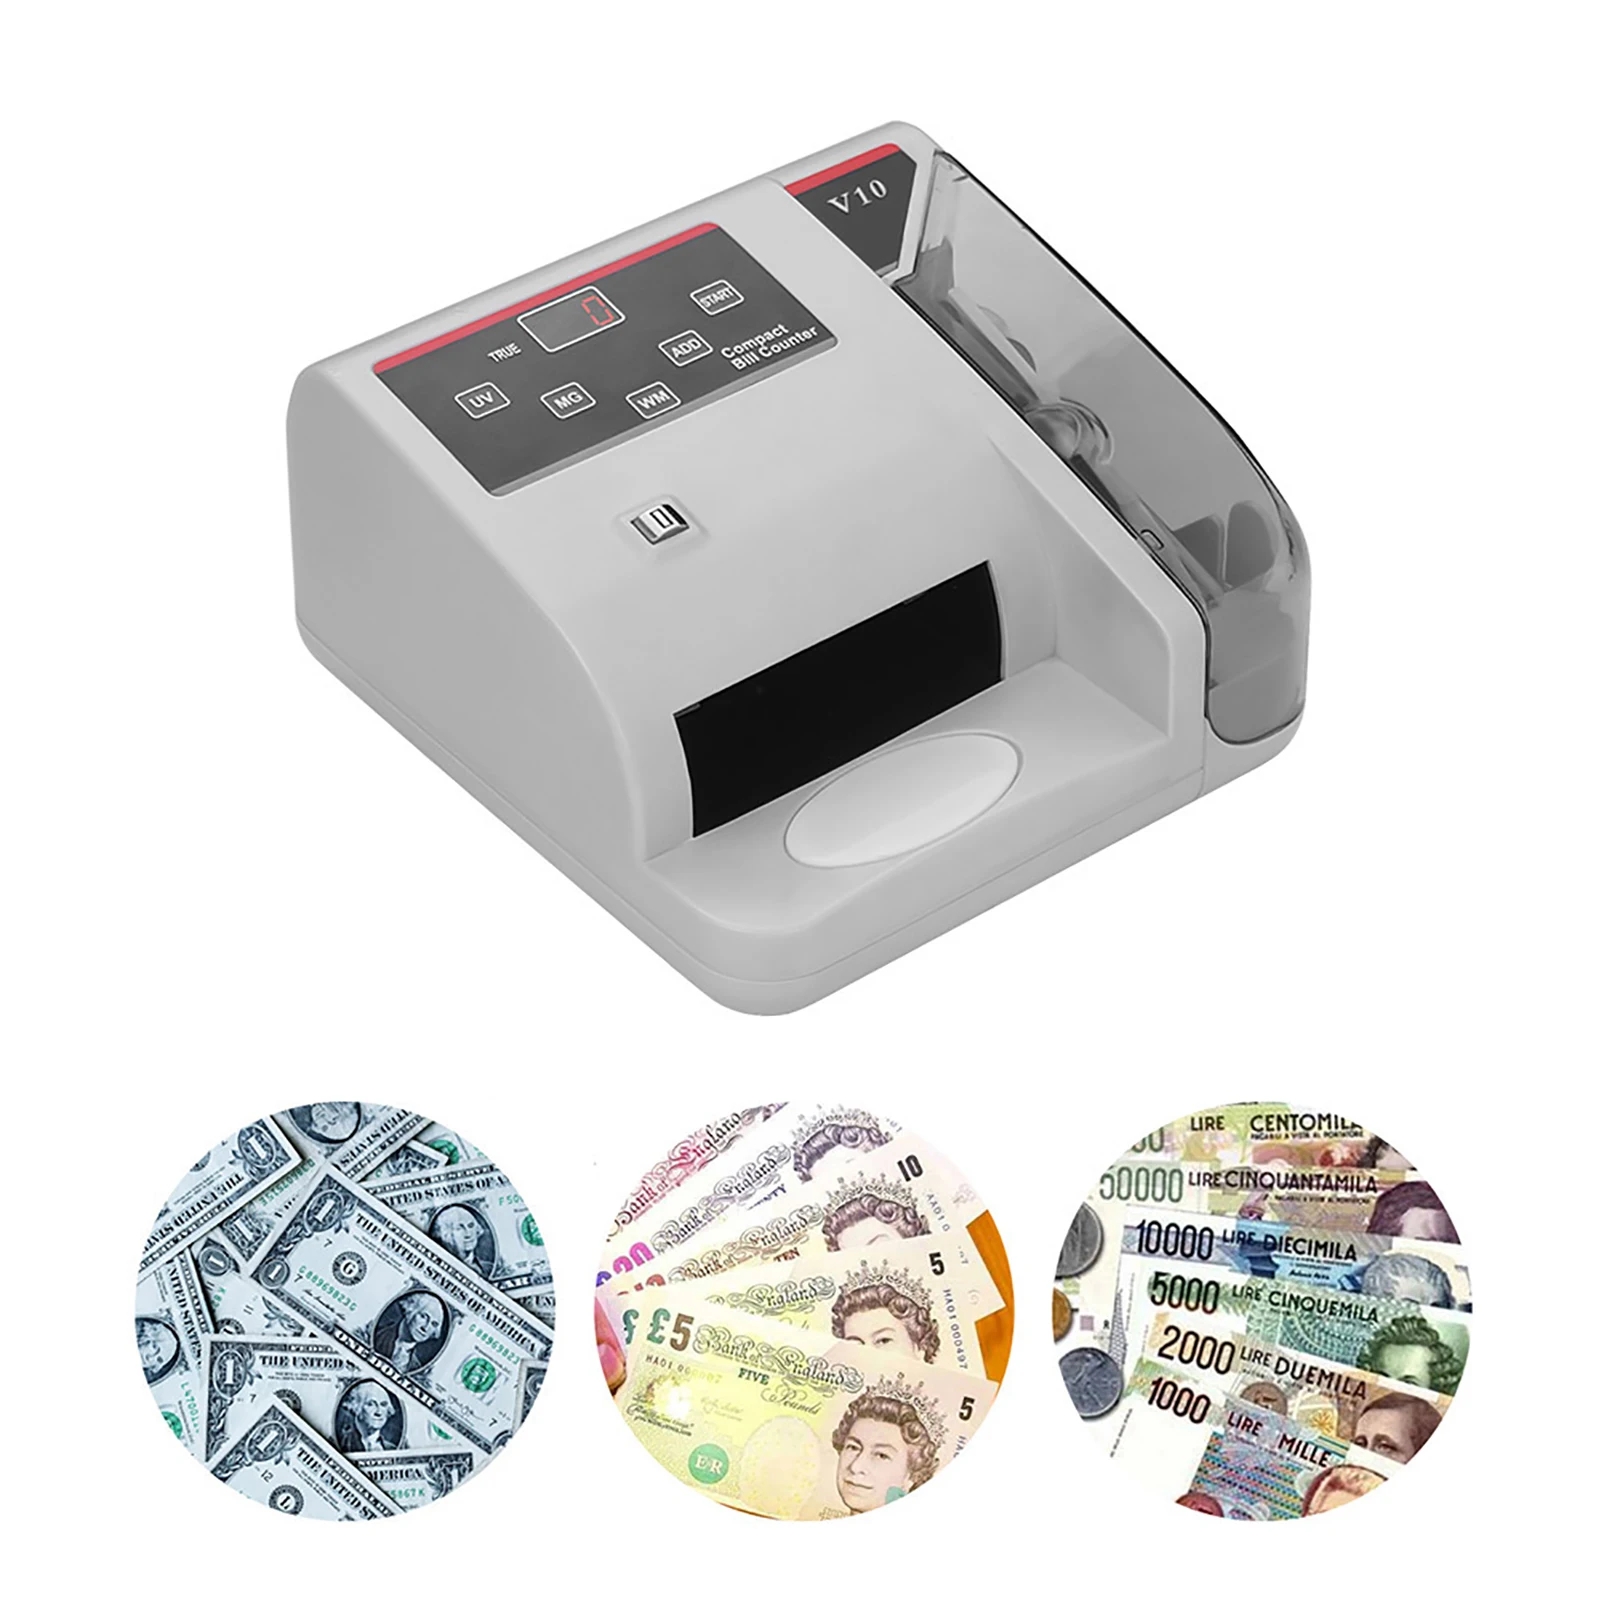 

LED Money Counter Worldwide Currency Cash Banknote Bill Counting Machine Detector with UV/MG/WM Counterfeit Detection